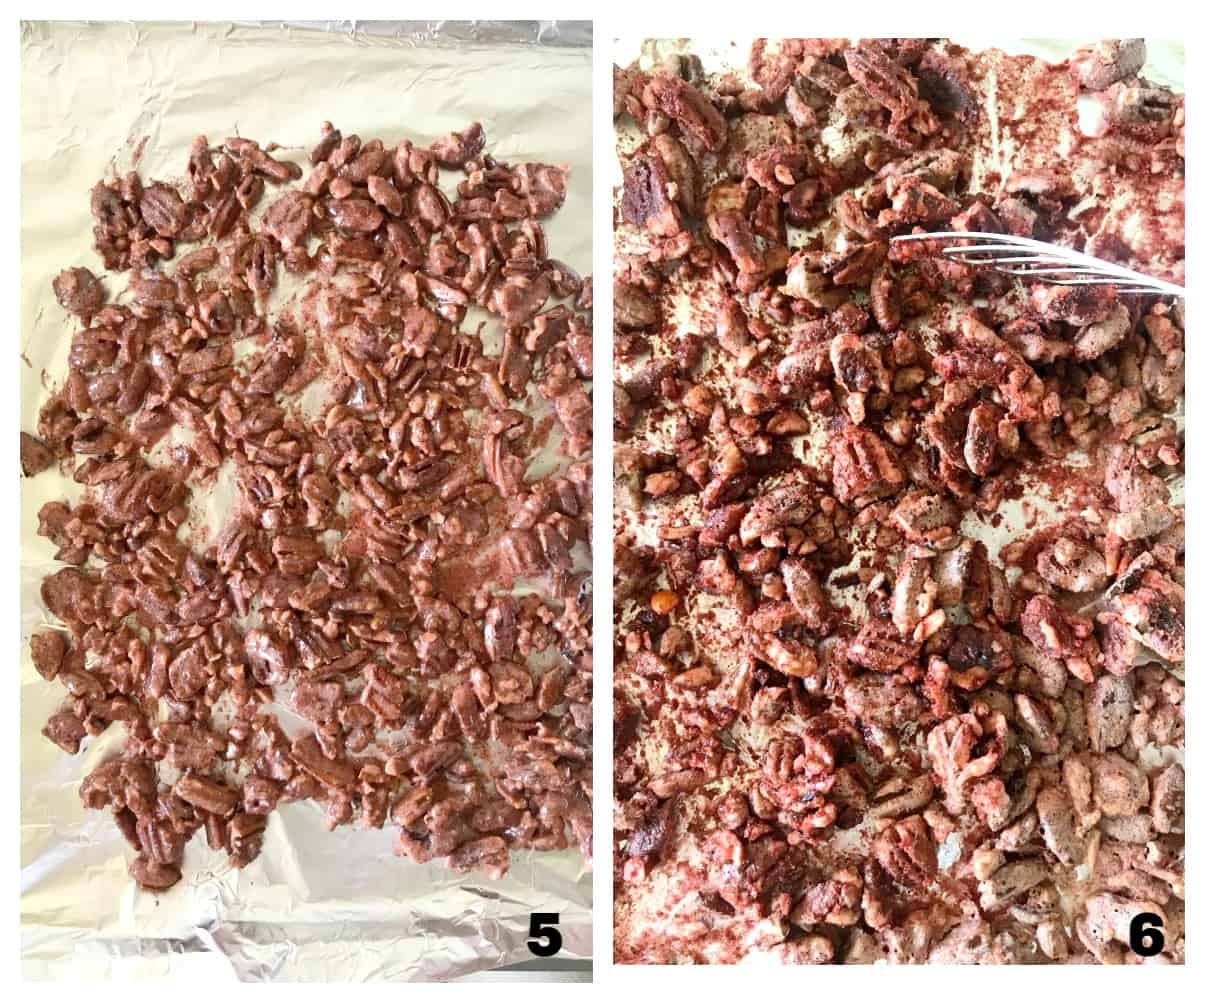 Baked cocktail nuts in aluminum foil; process collage.